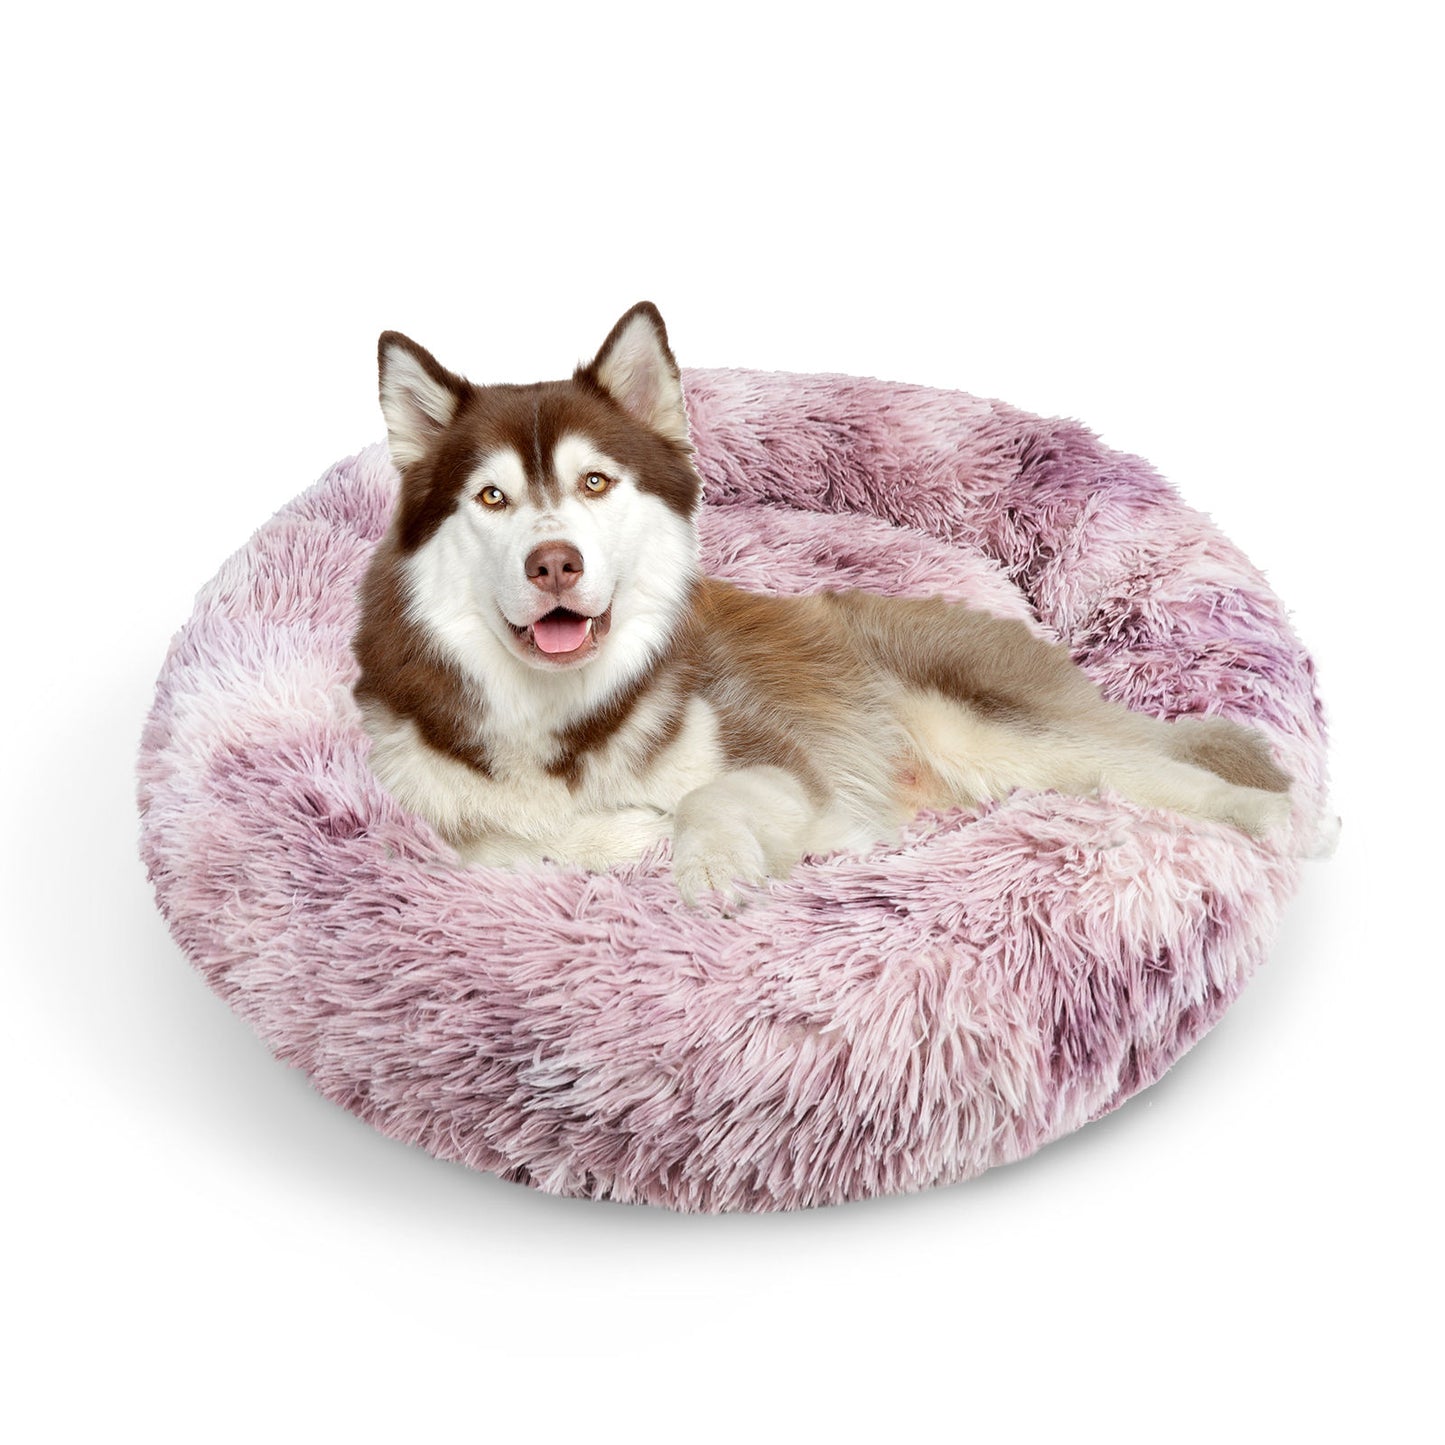 Pawfriends Dog Cat Pet Calming Bed Warm Soft Plush Round Nest Comfy Sleeping Kennel Cave 90